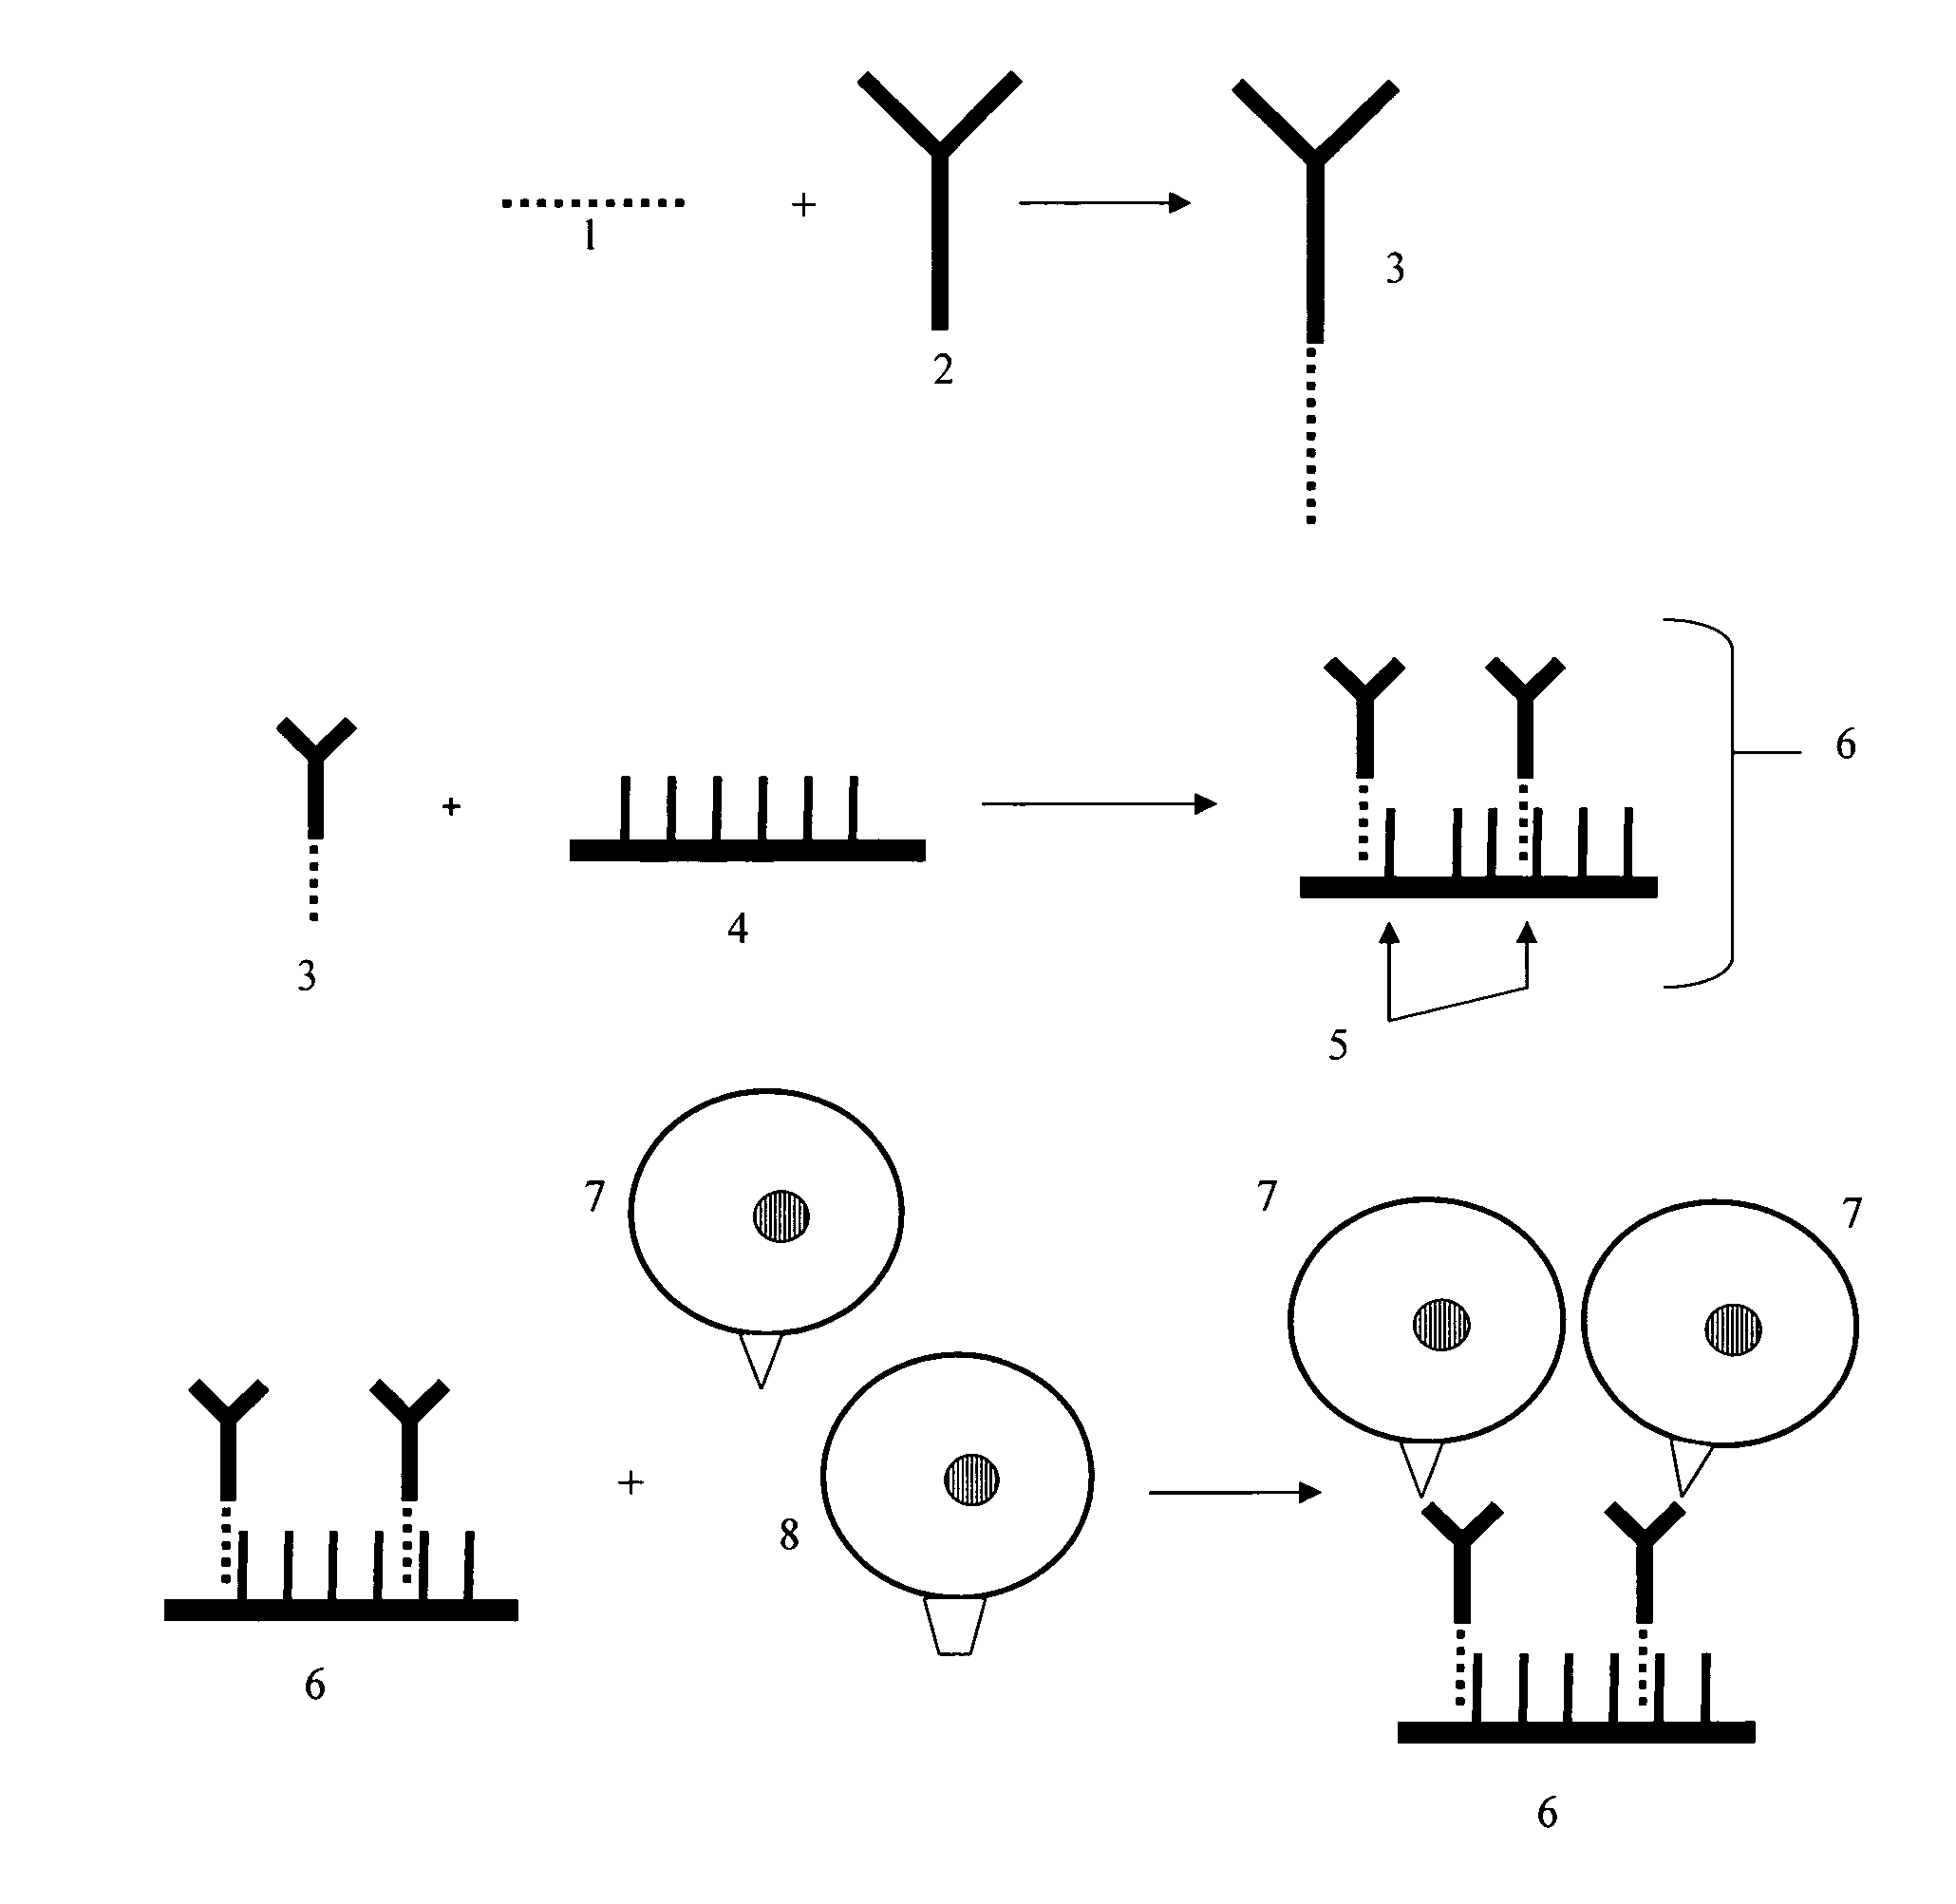 Cell-based microarrays, and methods for their preparation and use